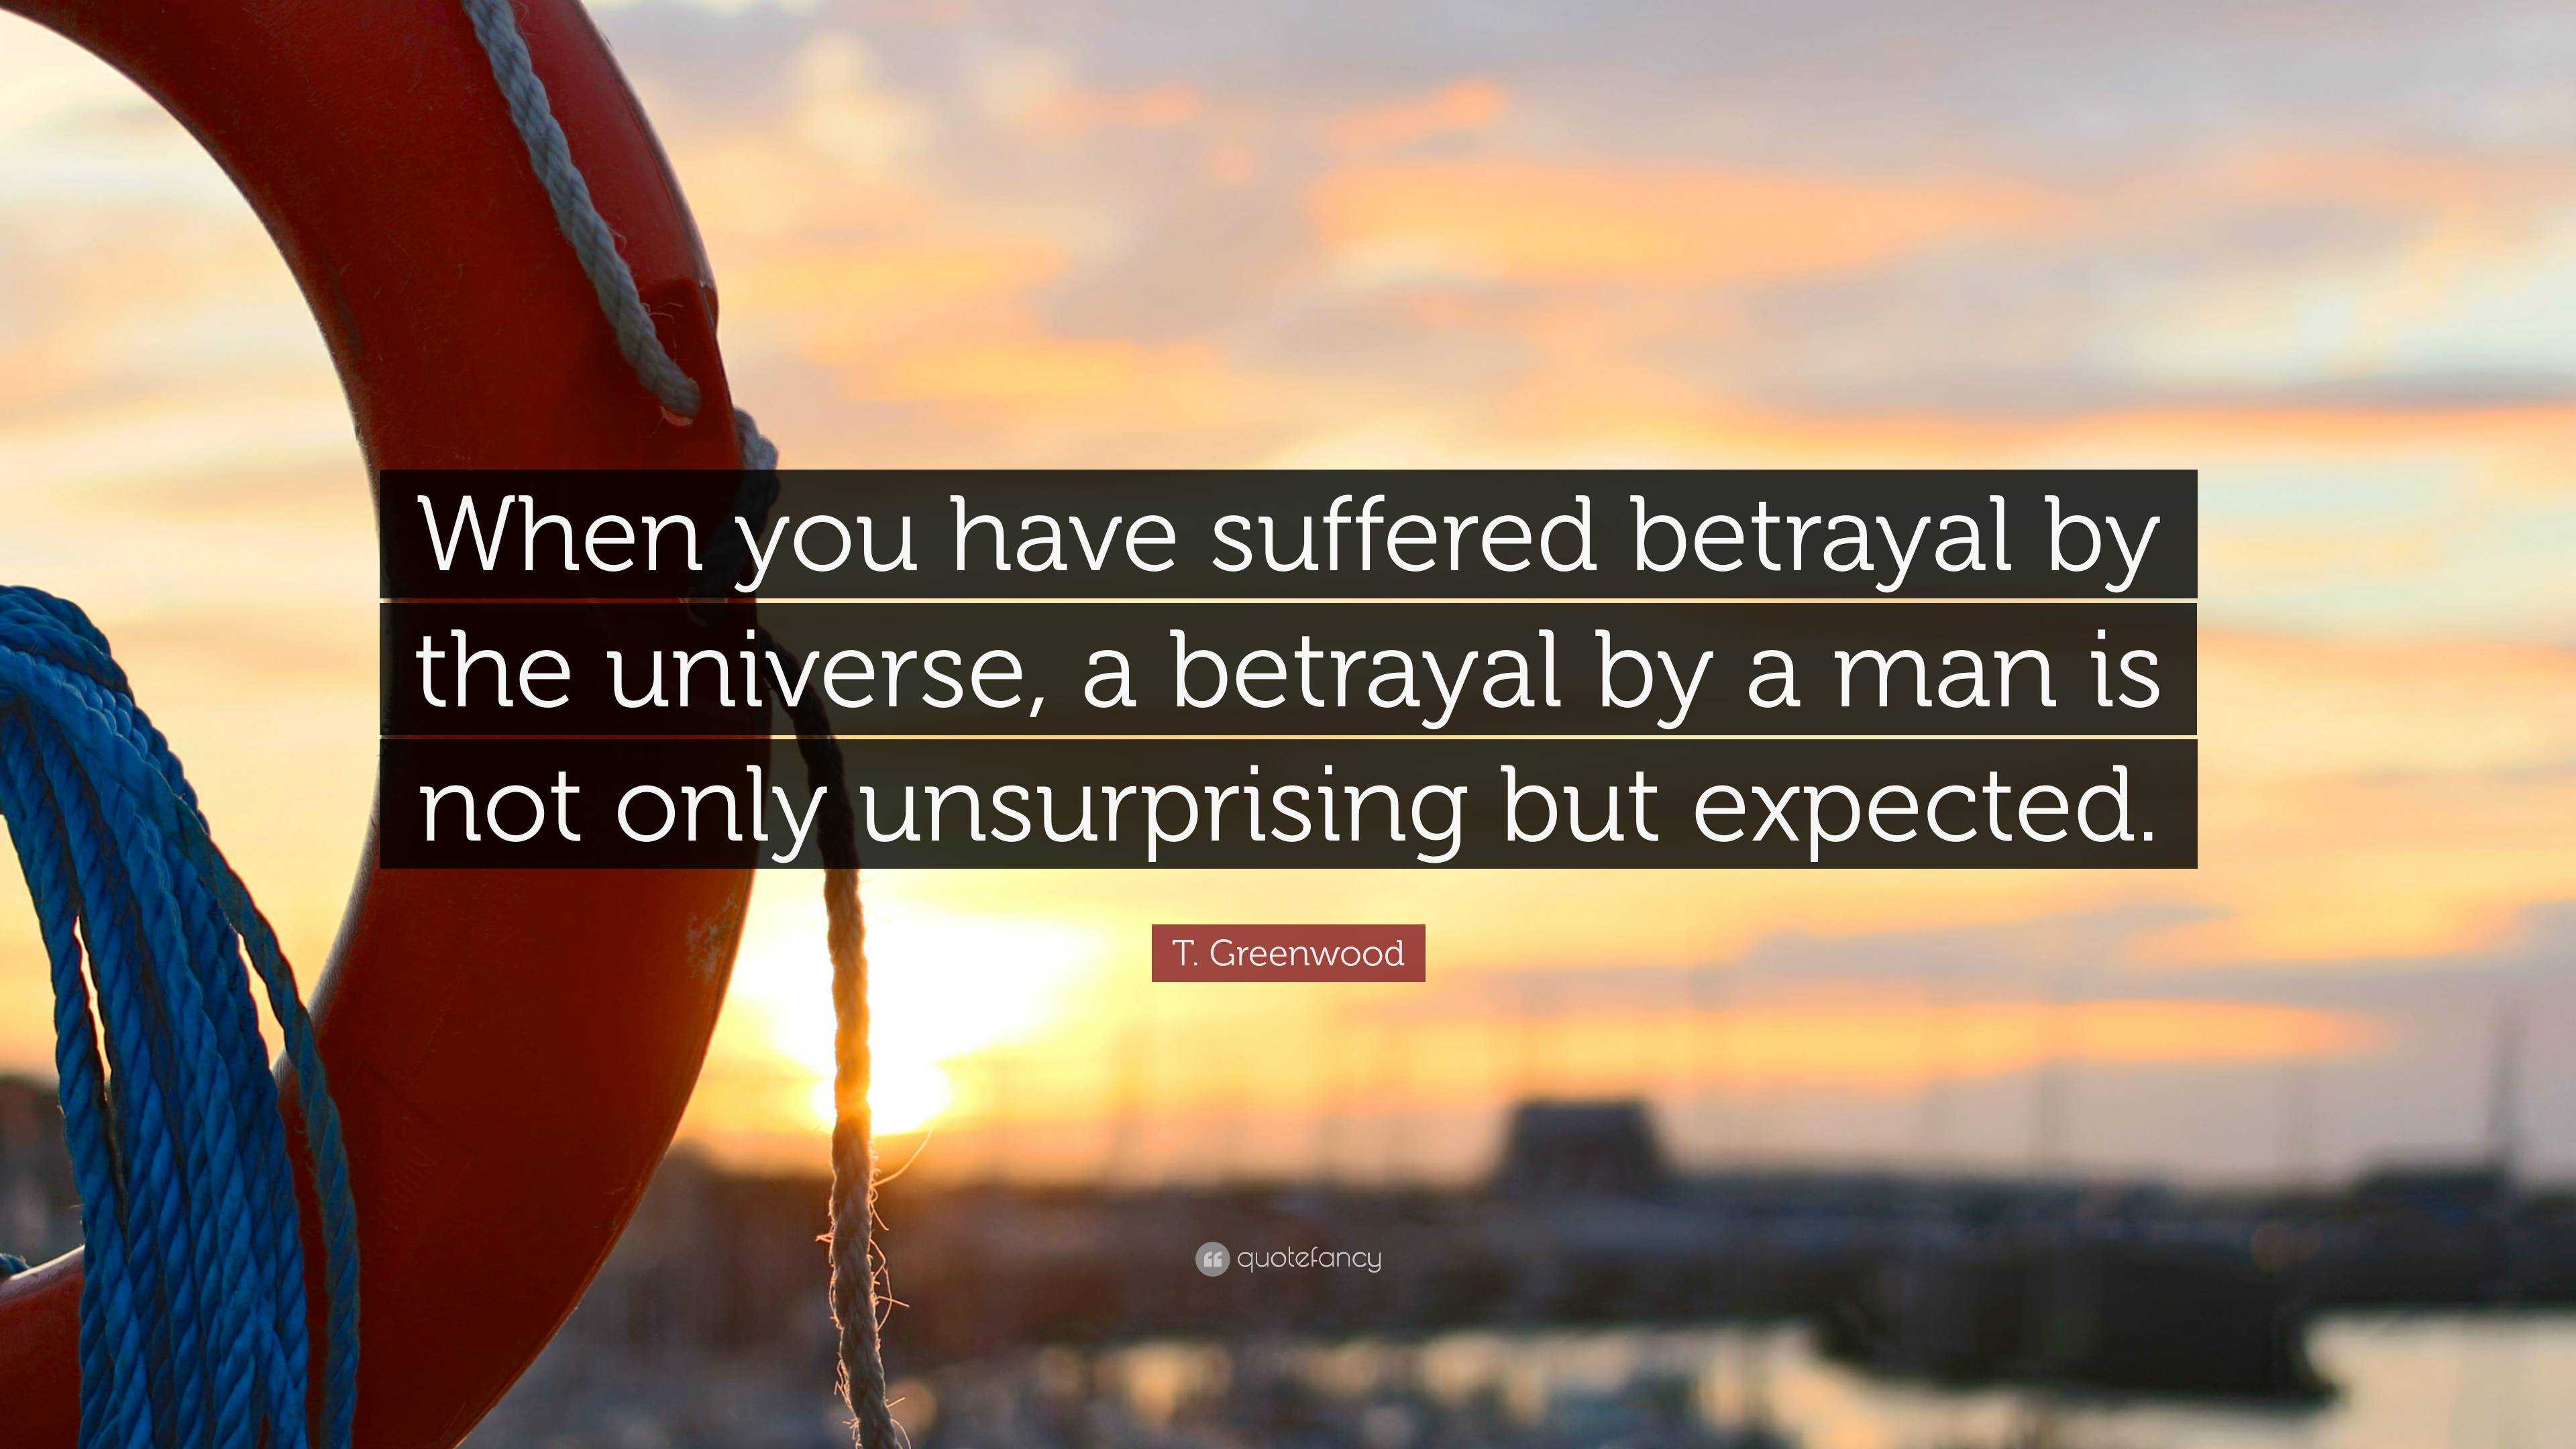 T. Greenwood Quote: “When you have suffered betrayal by the